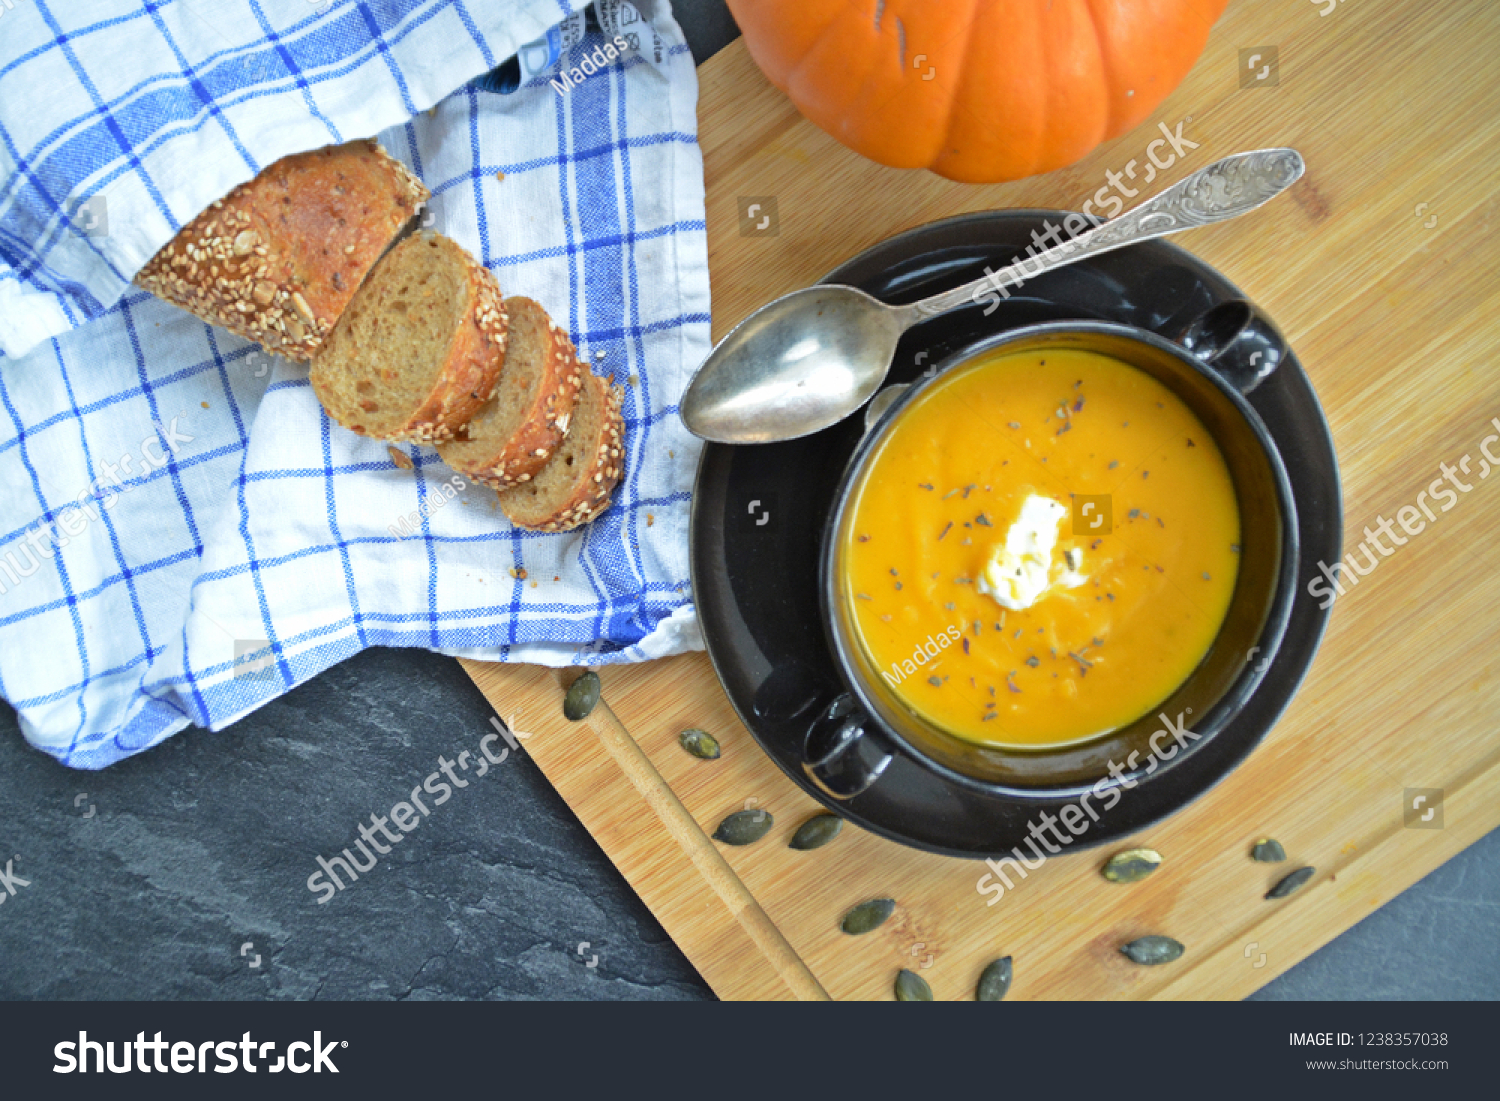 Pumpkin cream soup in a small bowl and on a wooden board on a kitchen surface with a whole pumpkin and sliced ​​bread beside it - autumnal feasting #1238357038